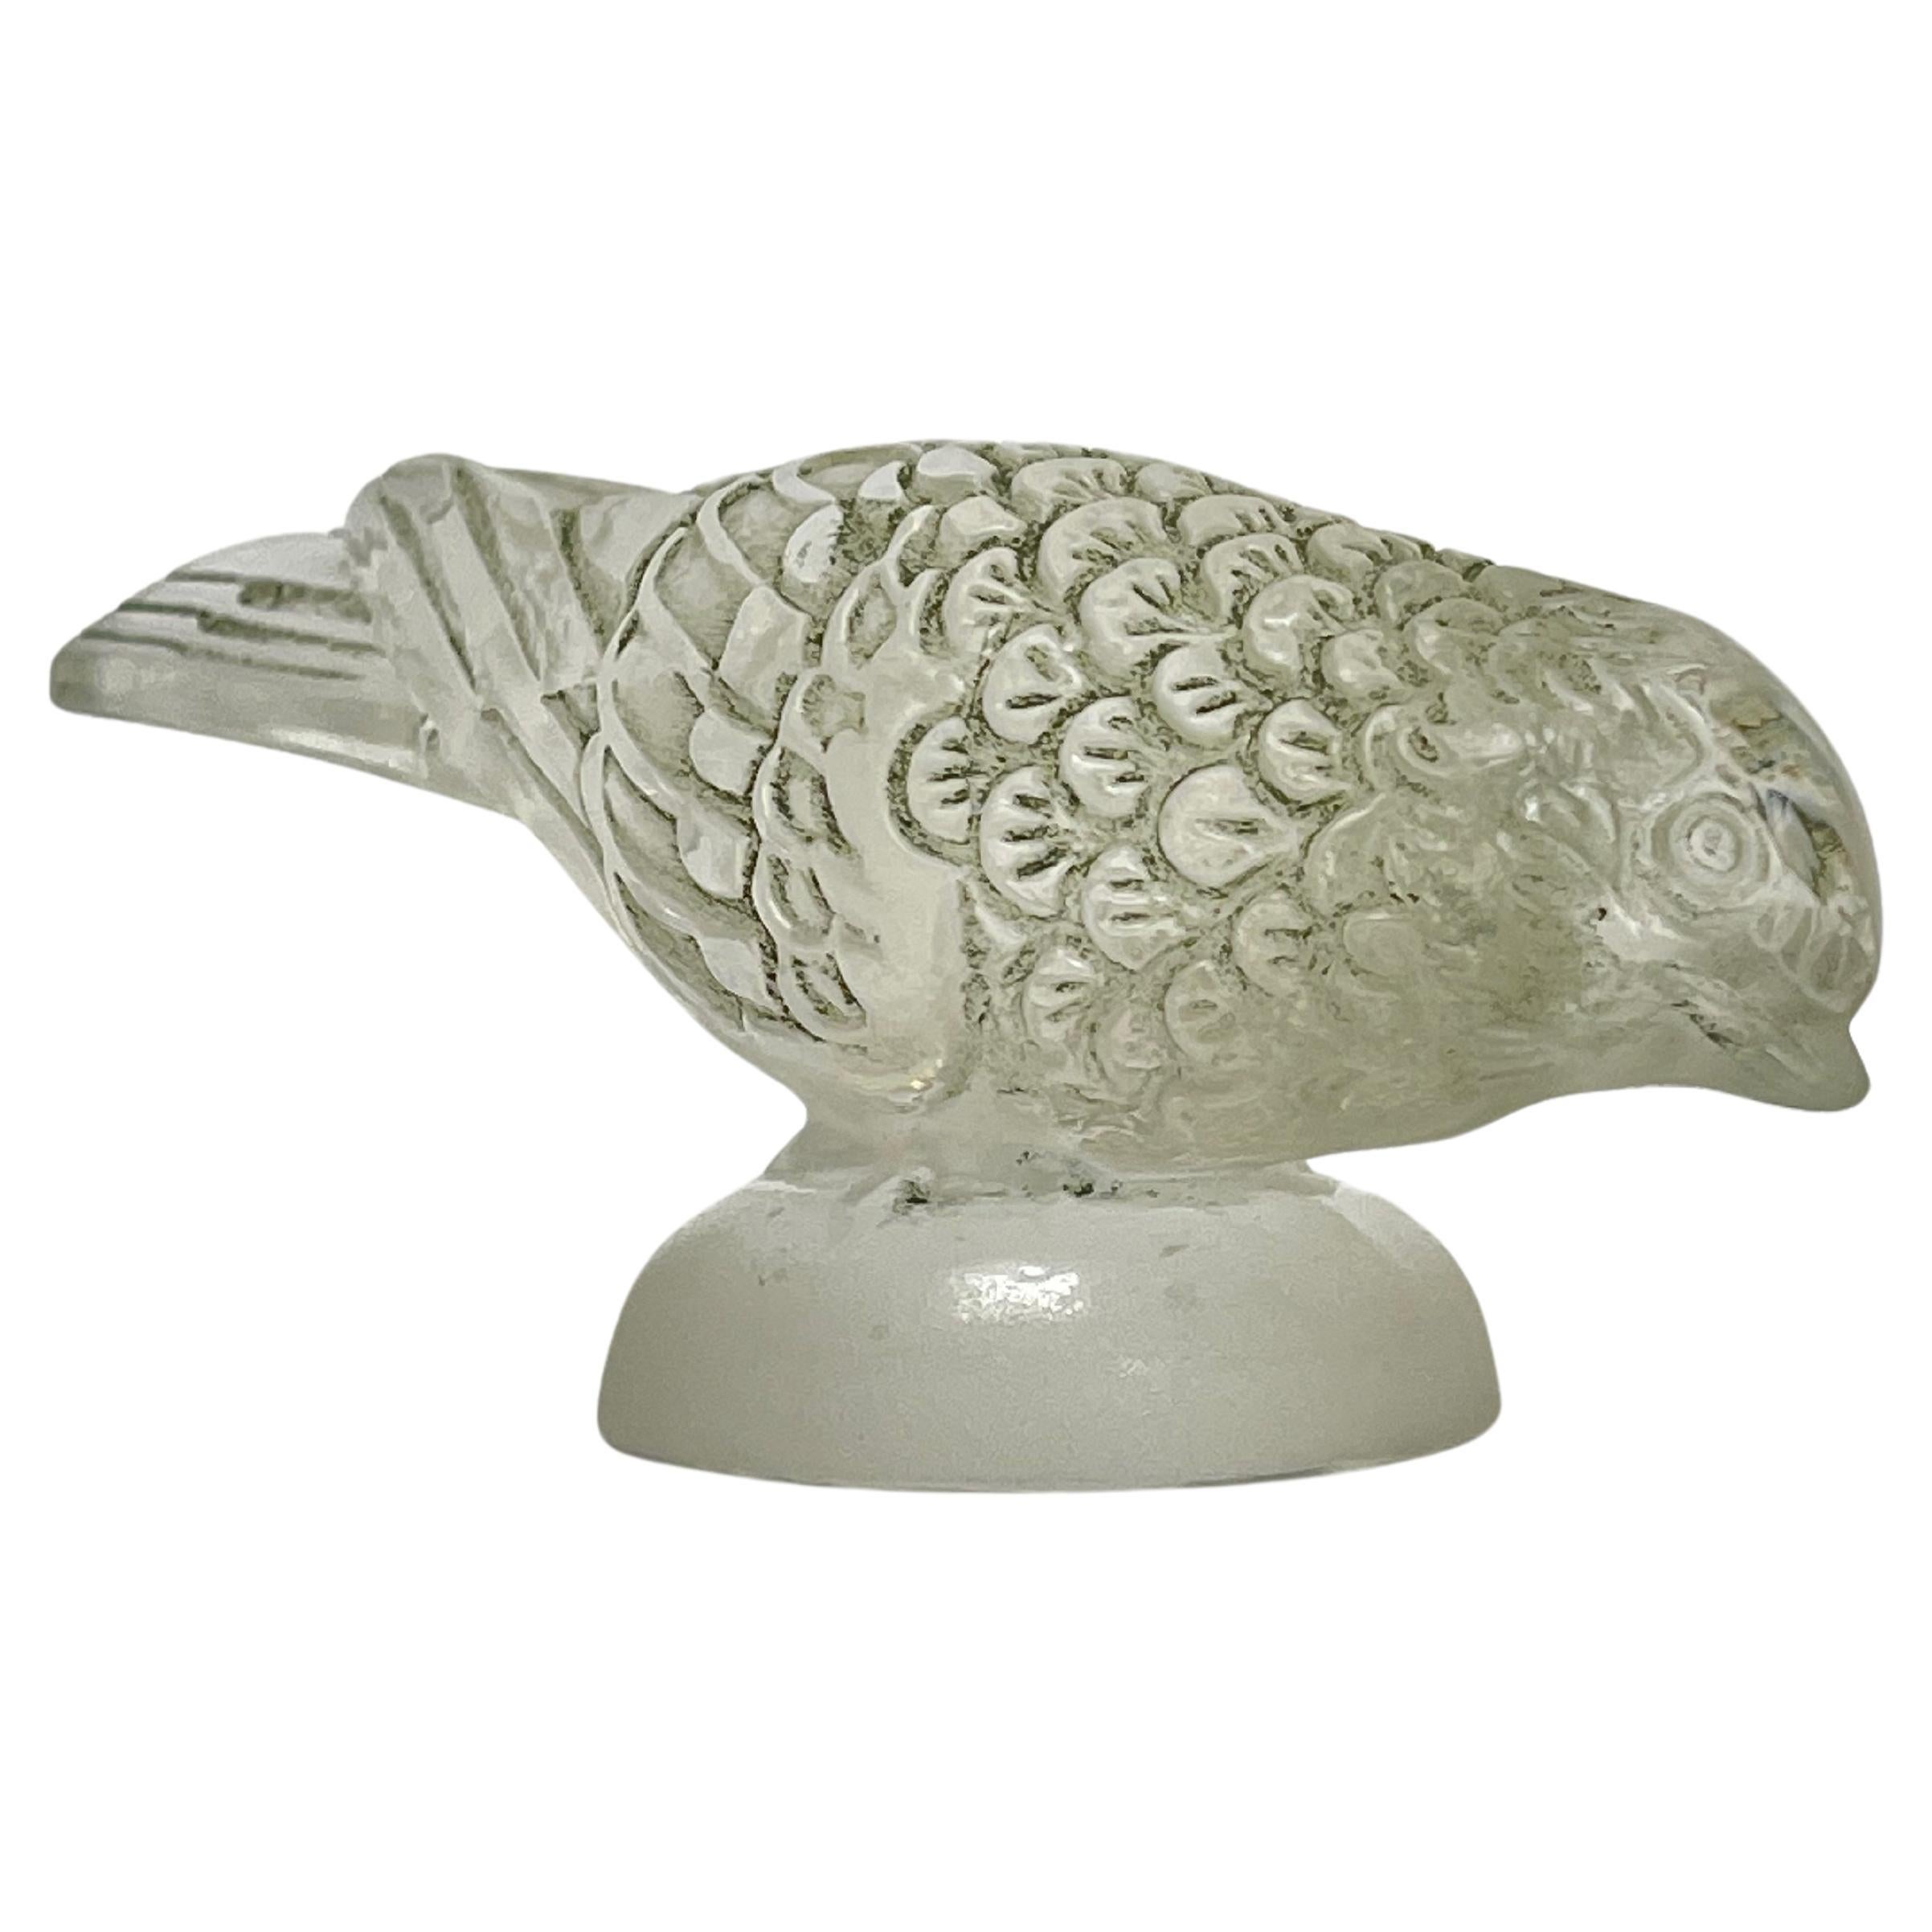 René Lalique Goldfinch Paperweight Created In 1931